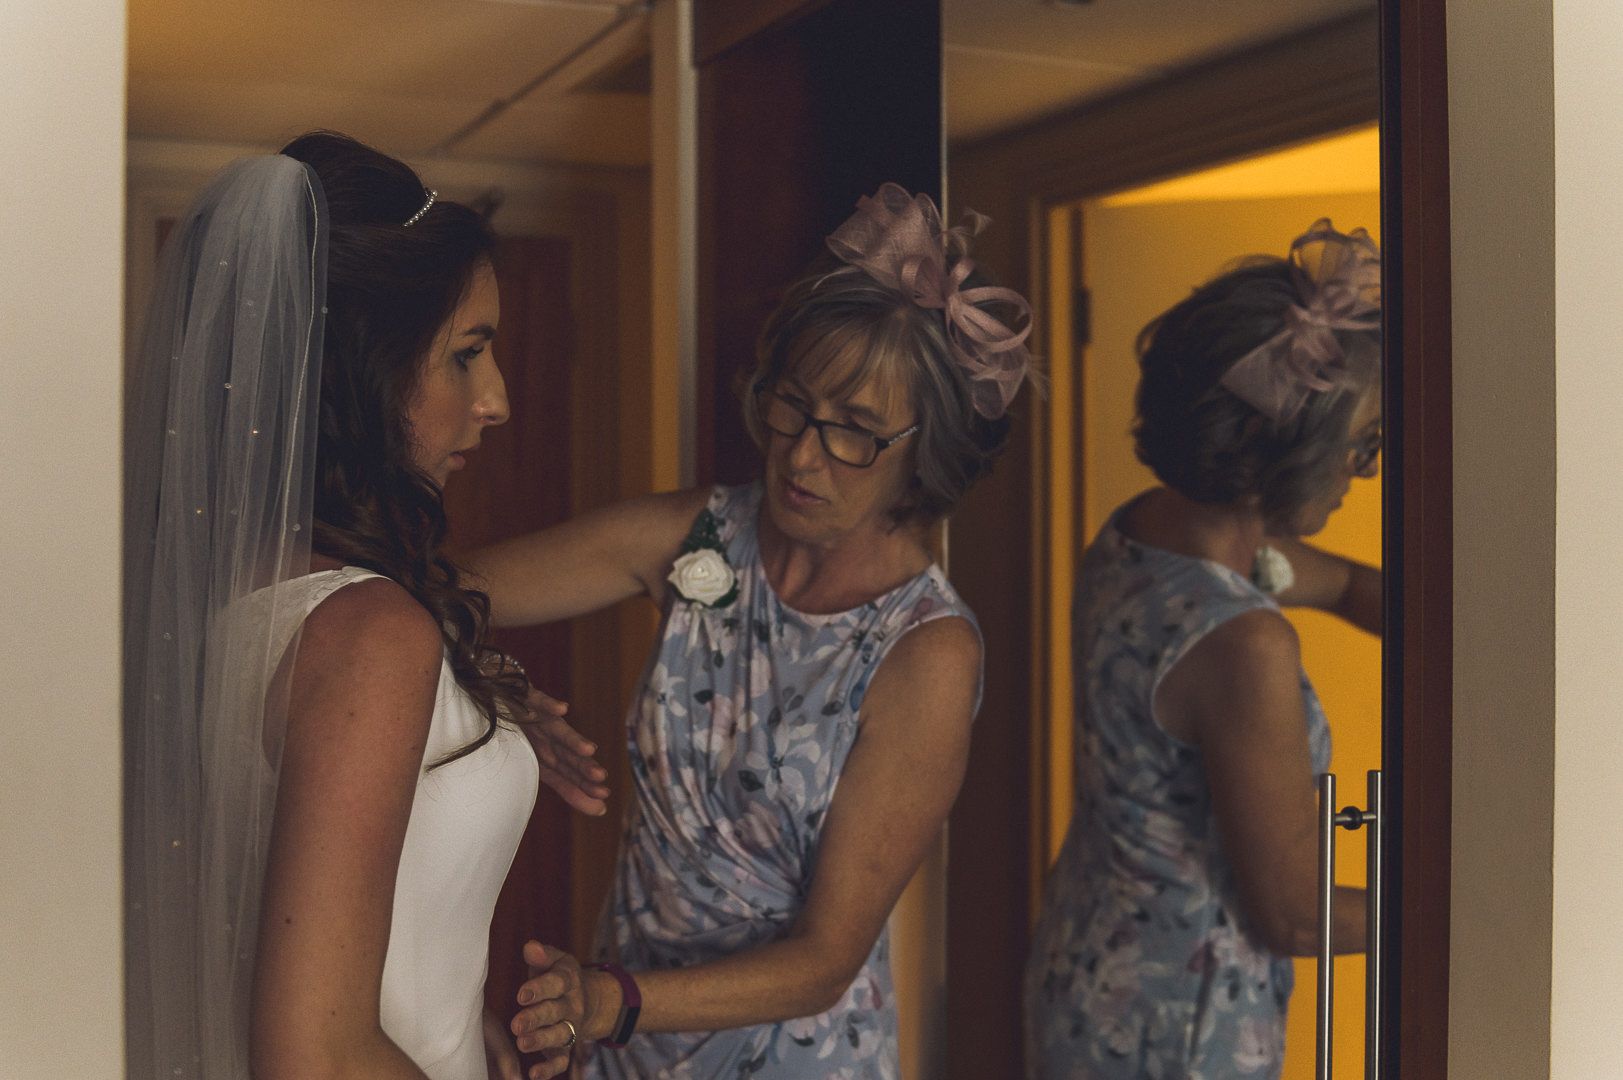 The mother of the bride is helping the bride fit into her dress